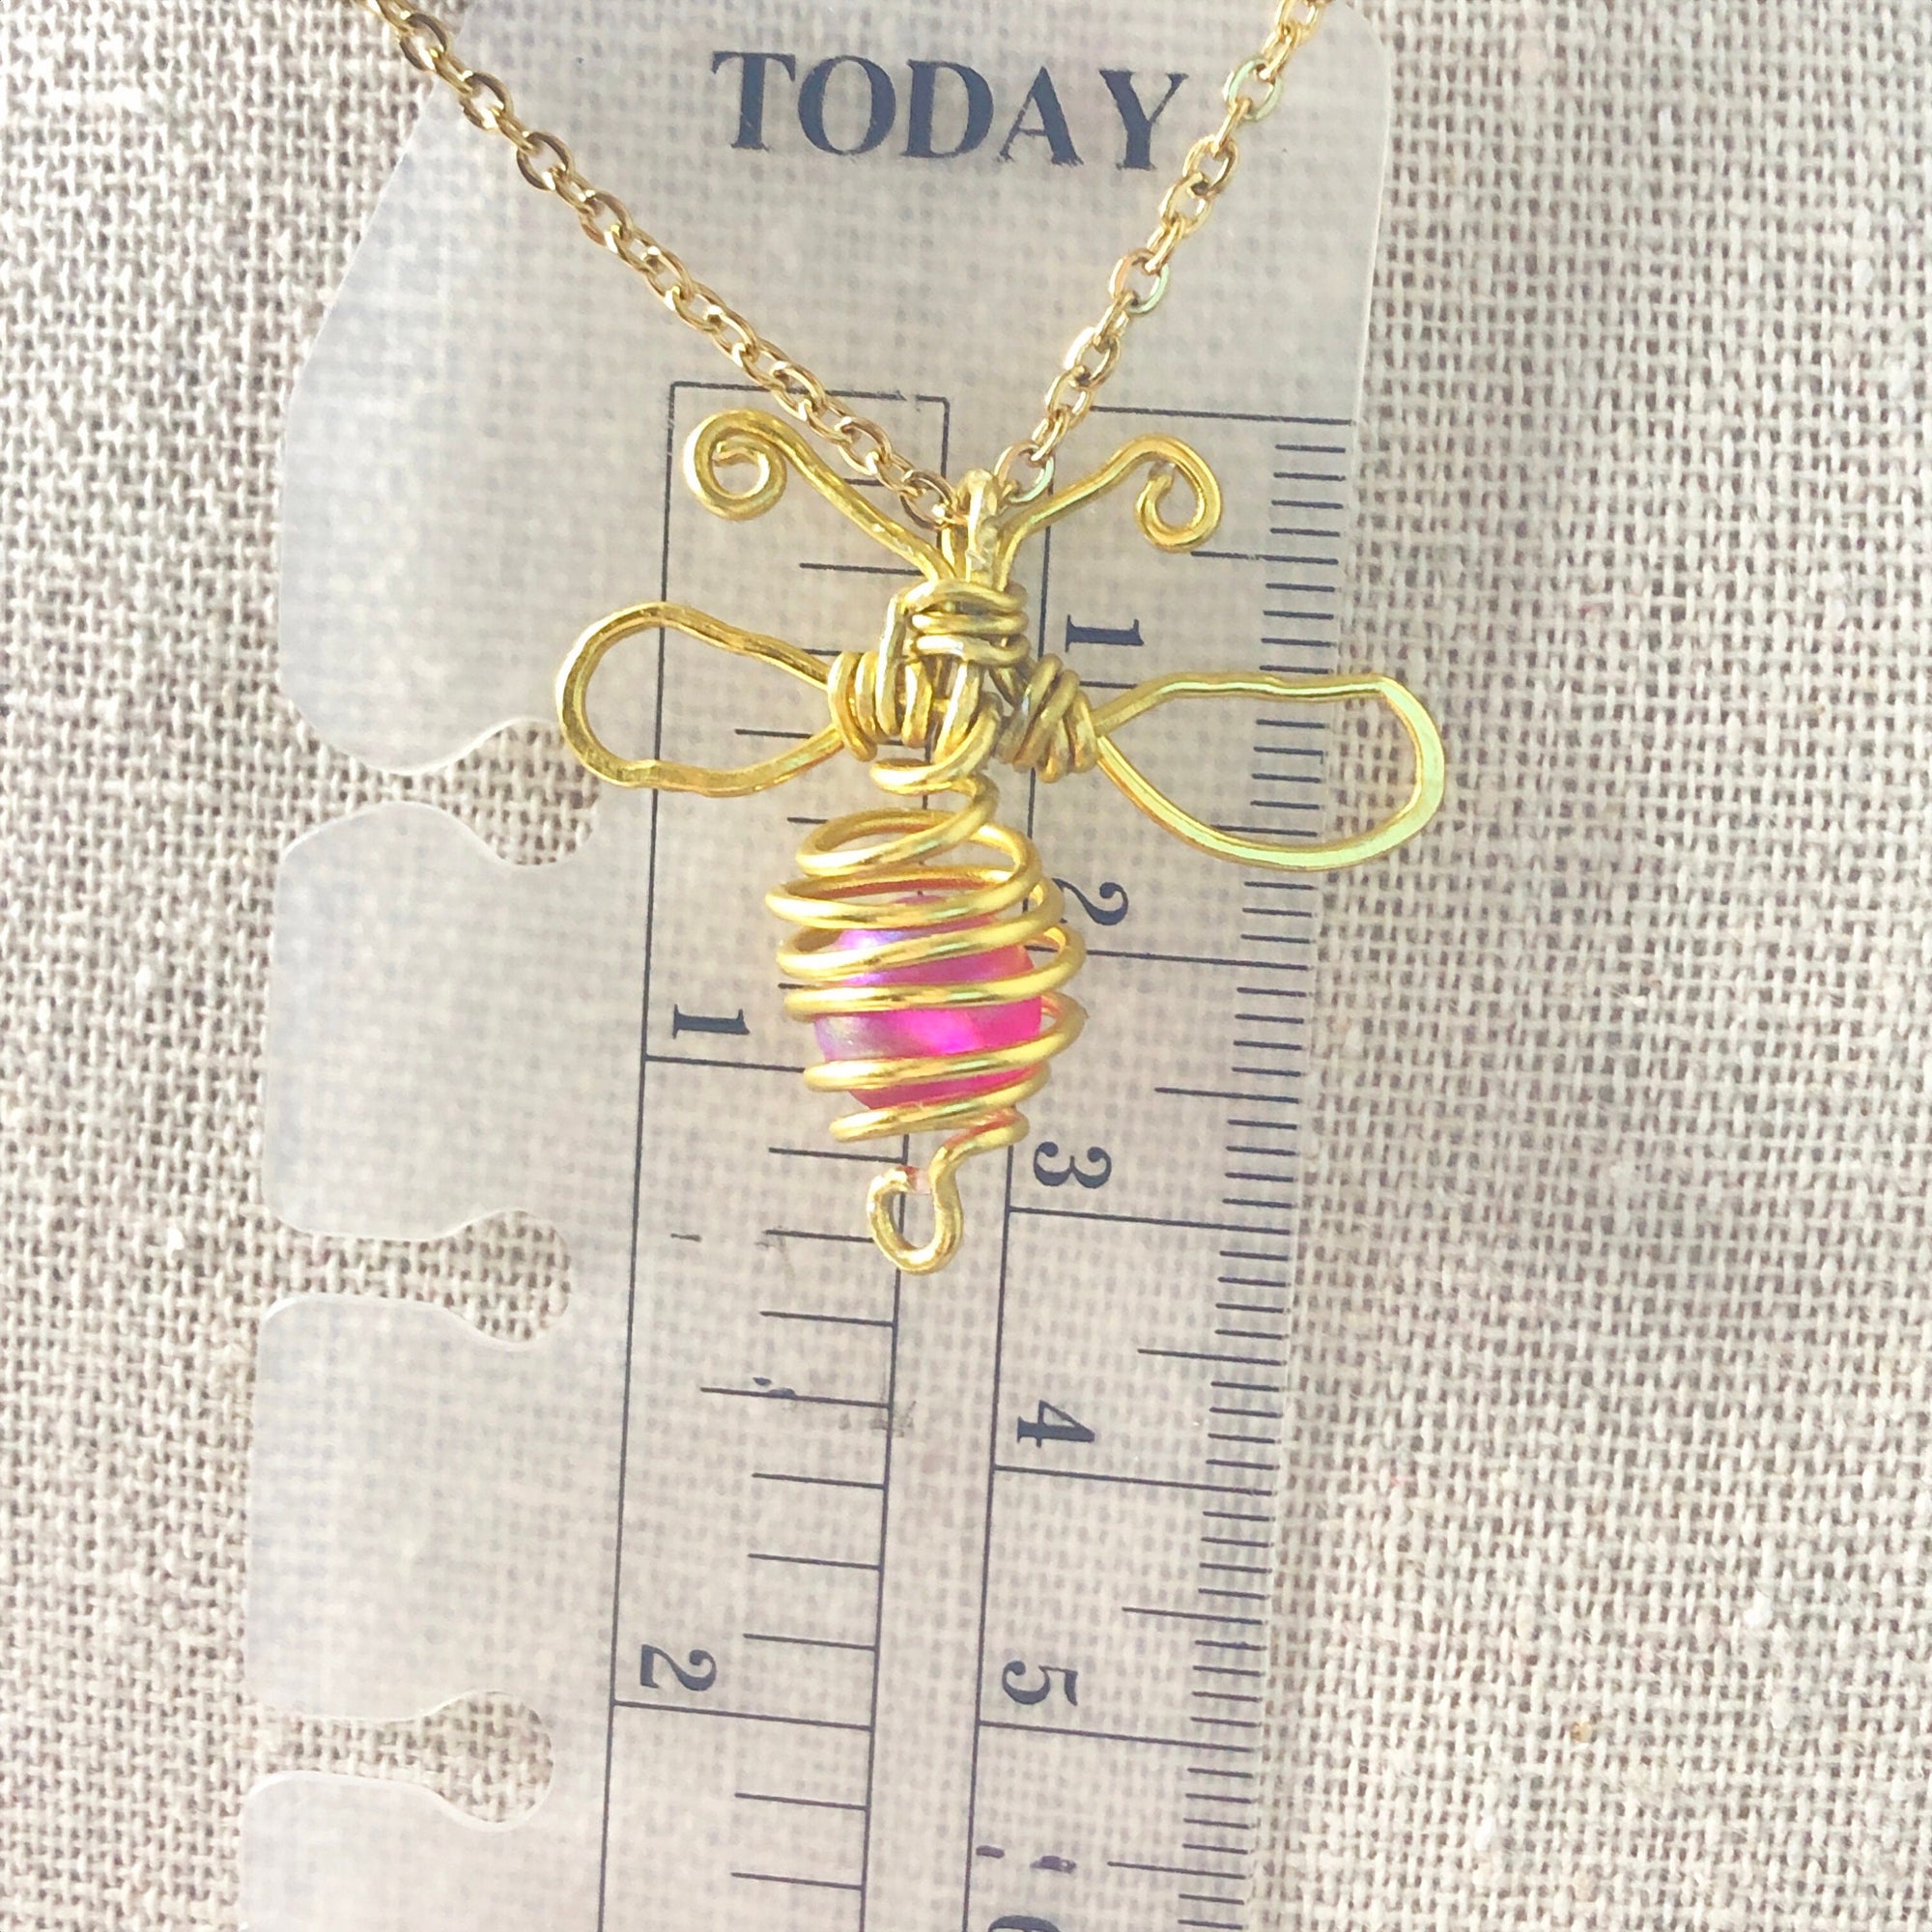 Personalized bead queen bee necklace, Honey bee pendant, Bumblebee insect jewelry, Bumble bee nature charm, Gold bee healing necklace